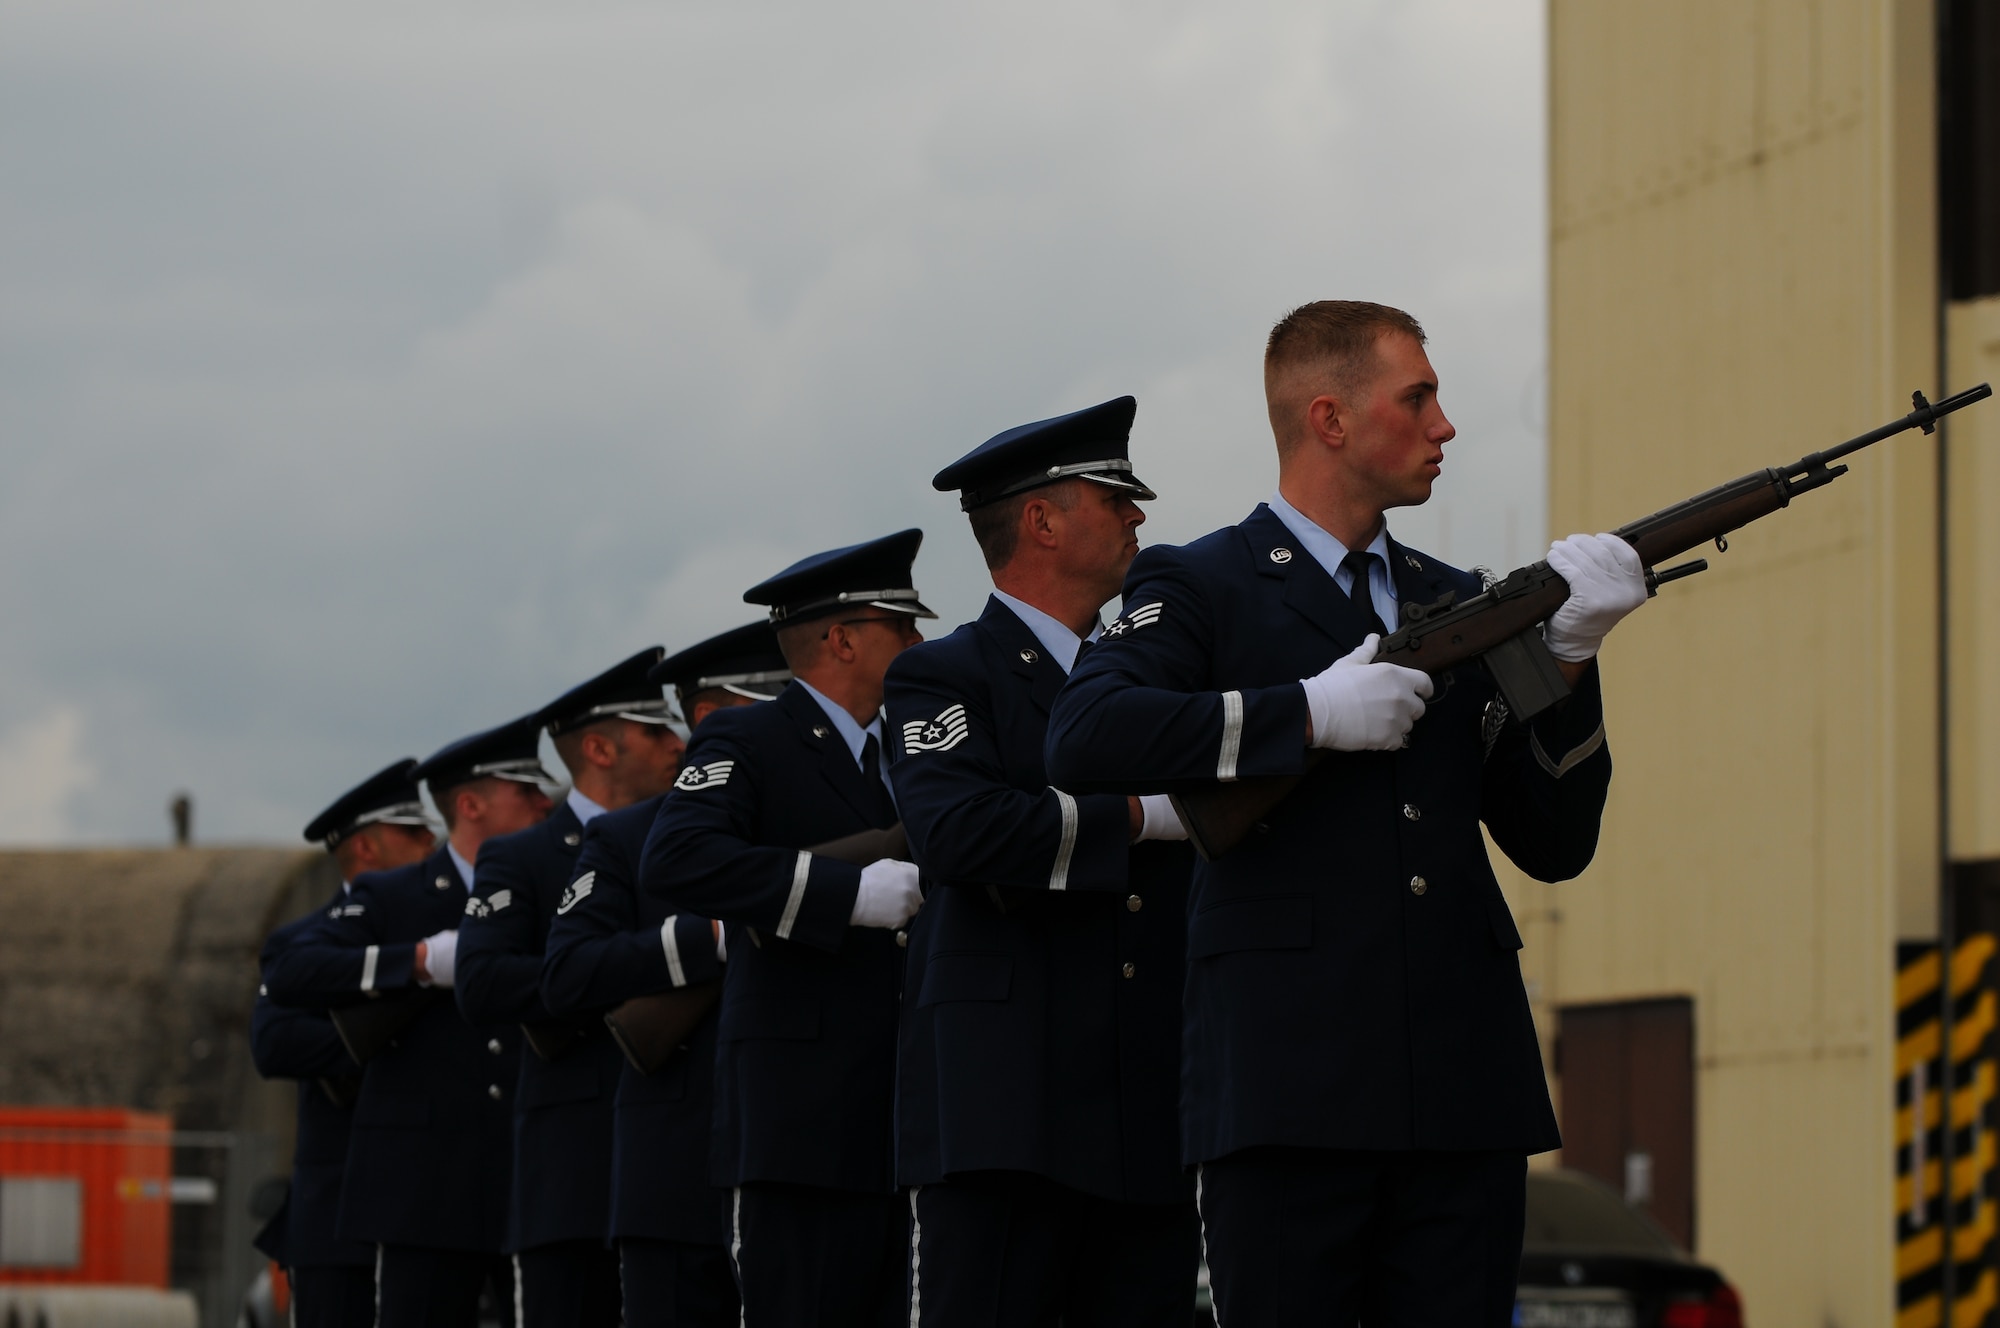 SPANGDAHLEM AIR BASE, Germany – Members of the 52nd Fighter Wing Honor Guard firing party fire three volleys in honor of Staff Sgt. Joseph J. Hamski, 52nd Civil Engineer Squadron Explosive Ordnance Flight, during his memorial service held here June 16. Sergeant Hamski was killed in action May 26, 2011, in Shorabak, Afghanistan, while responding to a known enemy weapons cache. (U.S. Air Force photo/Airman 1st Class Dillon Davis)